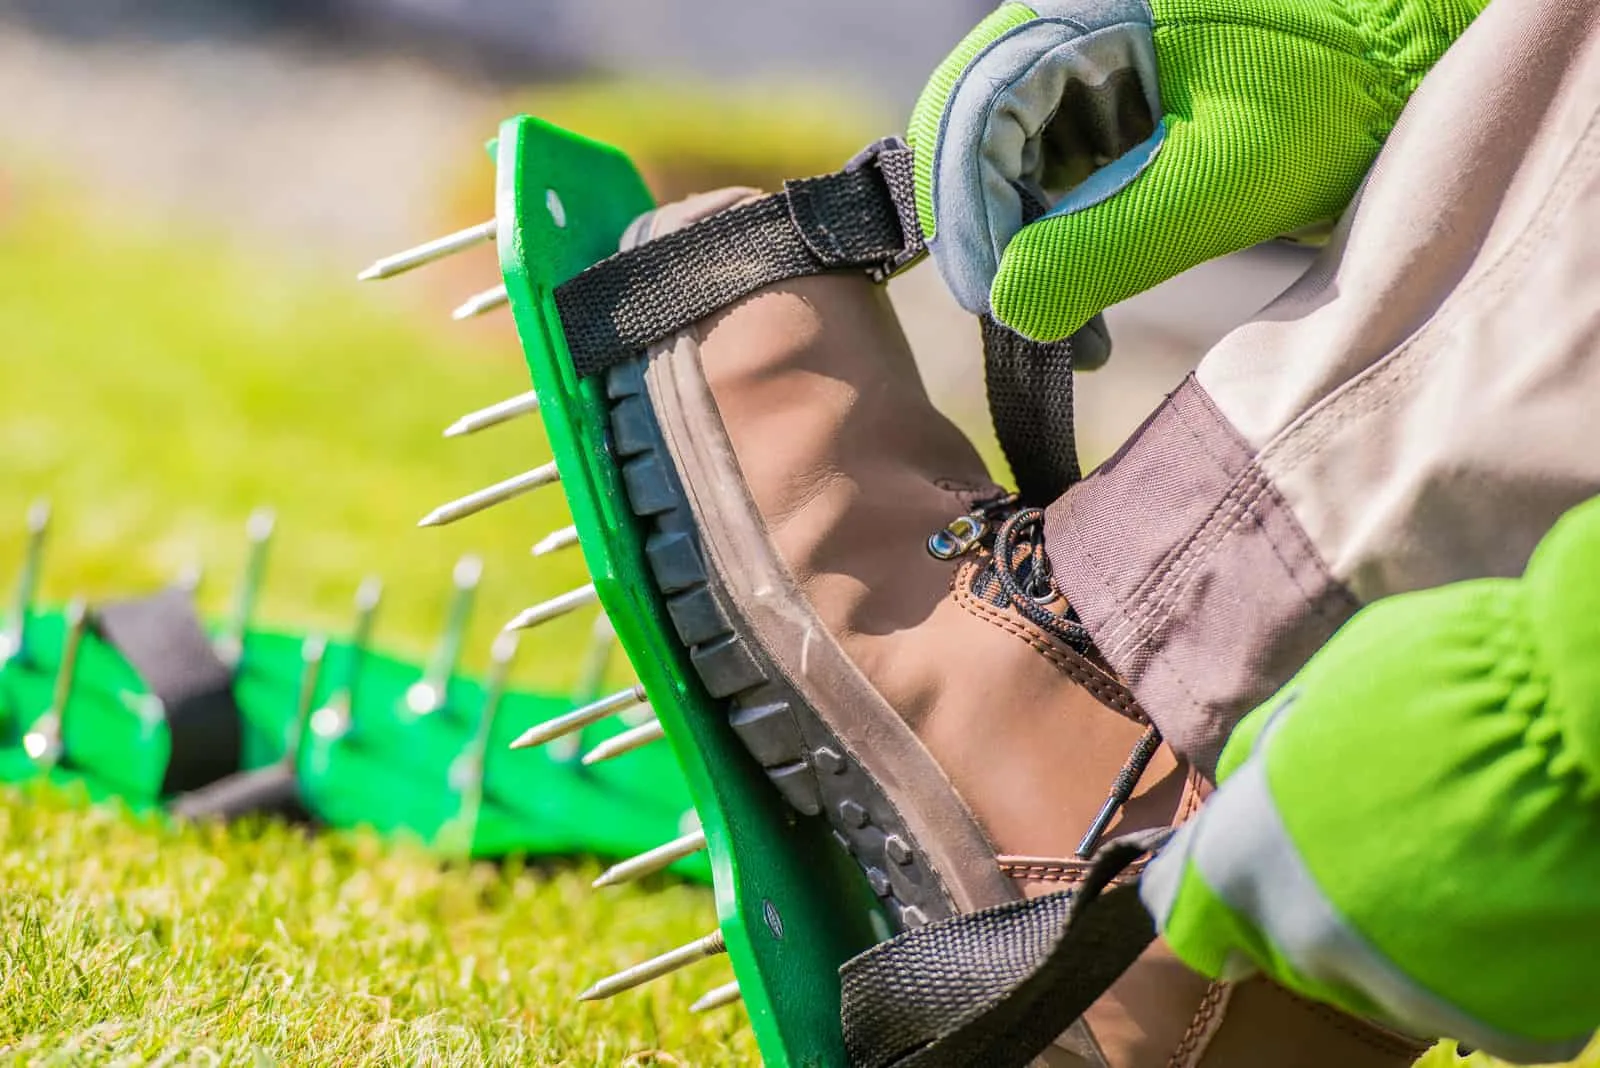 men aerating his lawn strapping on these spiked shoes